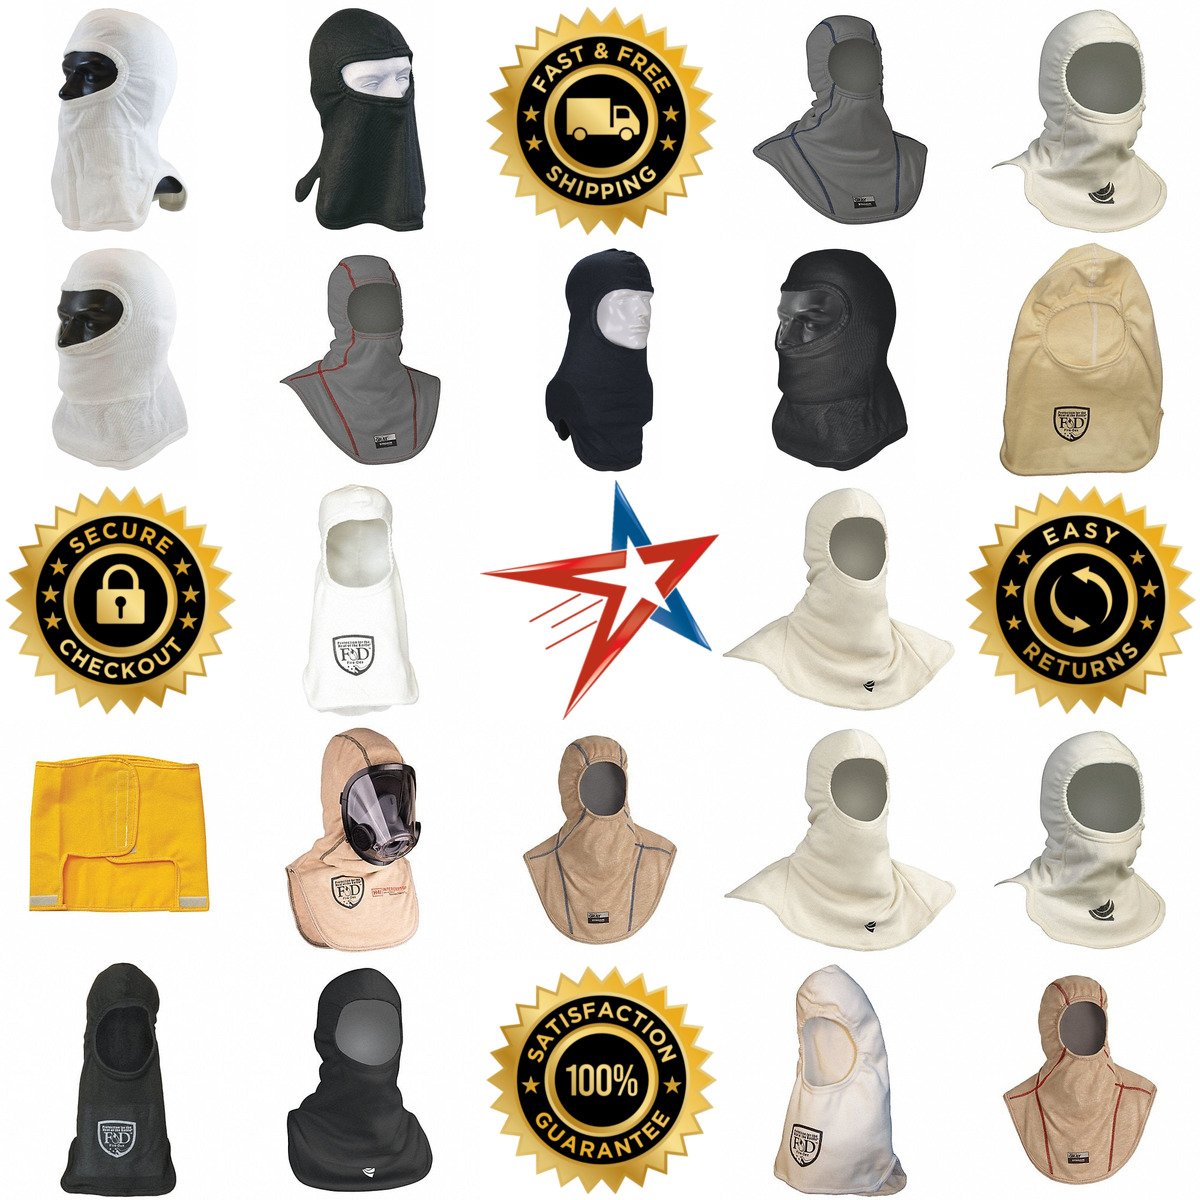 A selection of Fire Hoods products on GoVets